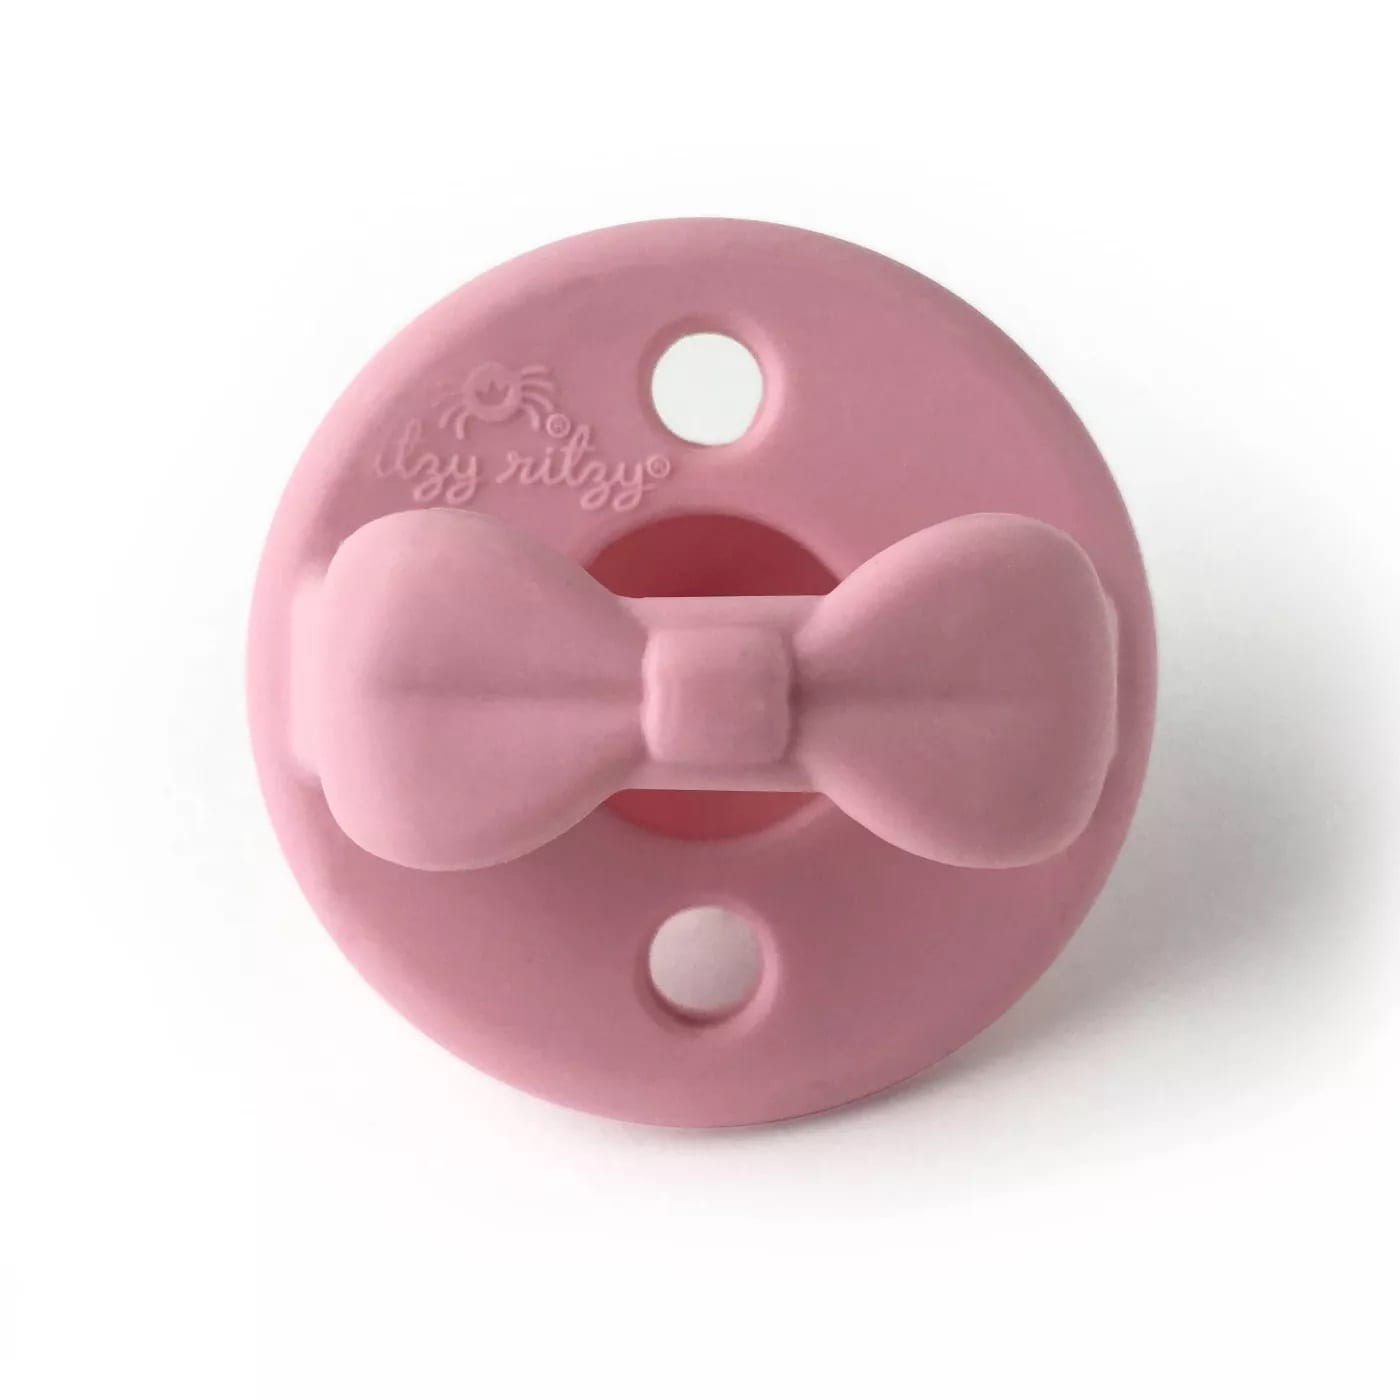 Itzy Ritzy Pink Sweetie Soother